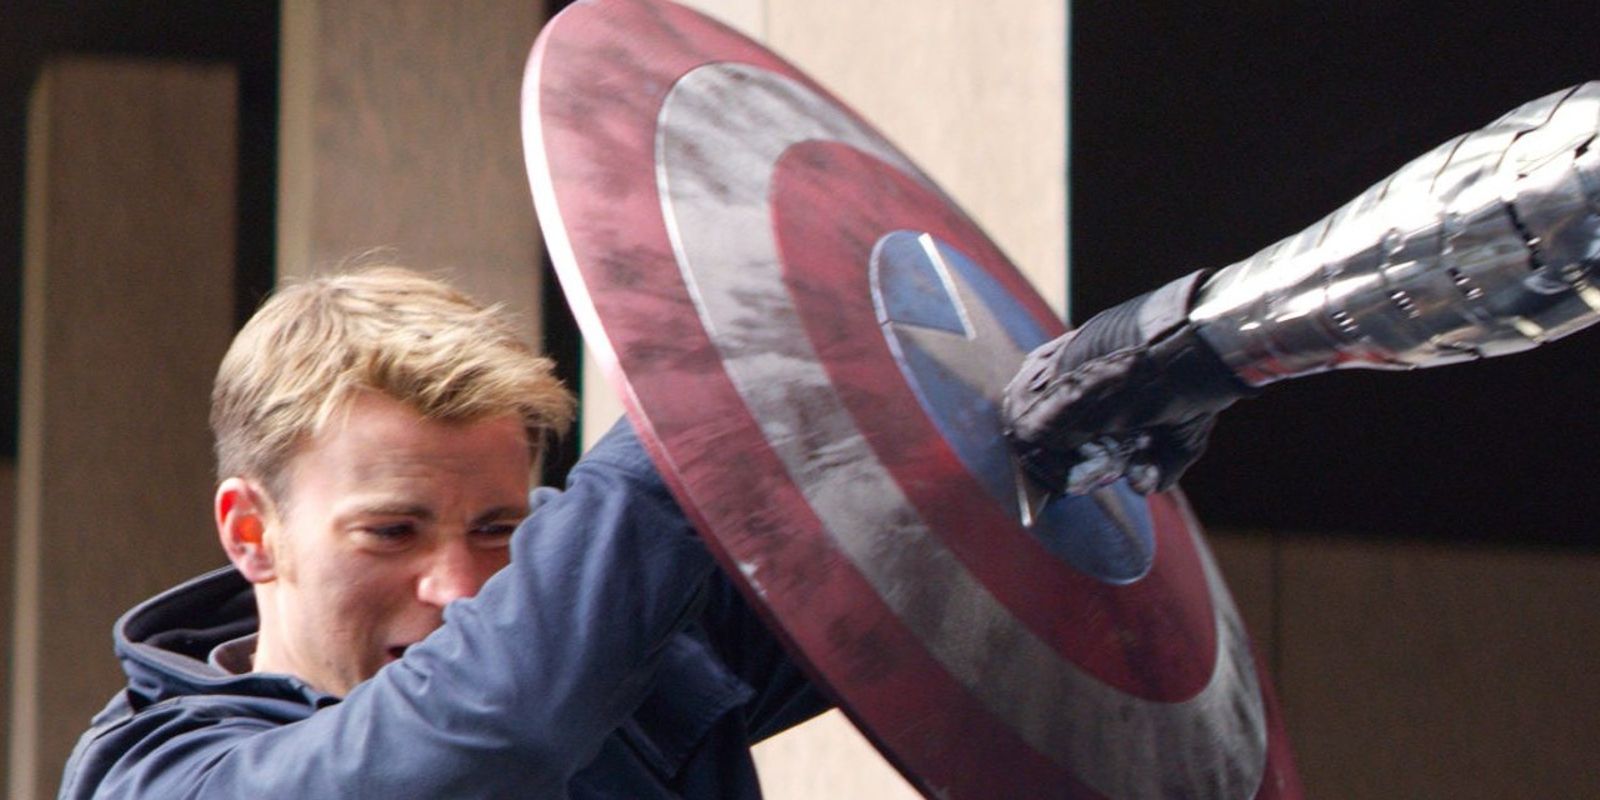 Captain America holding back The Winter Soldier's punch with his shield in Captain America: The Winter Soldier